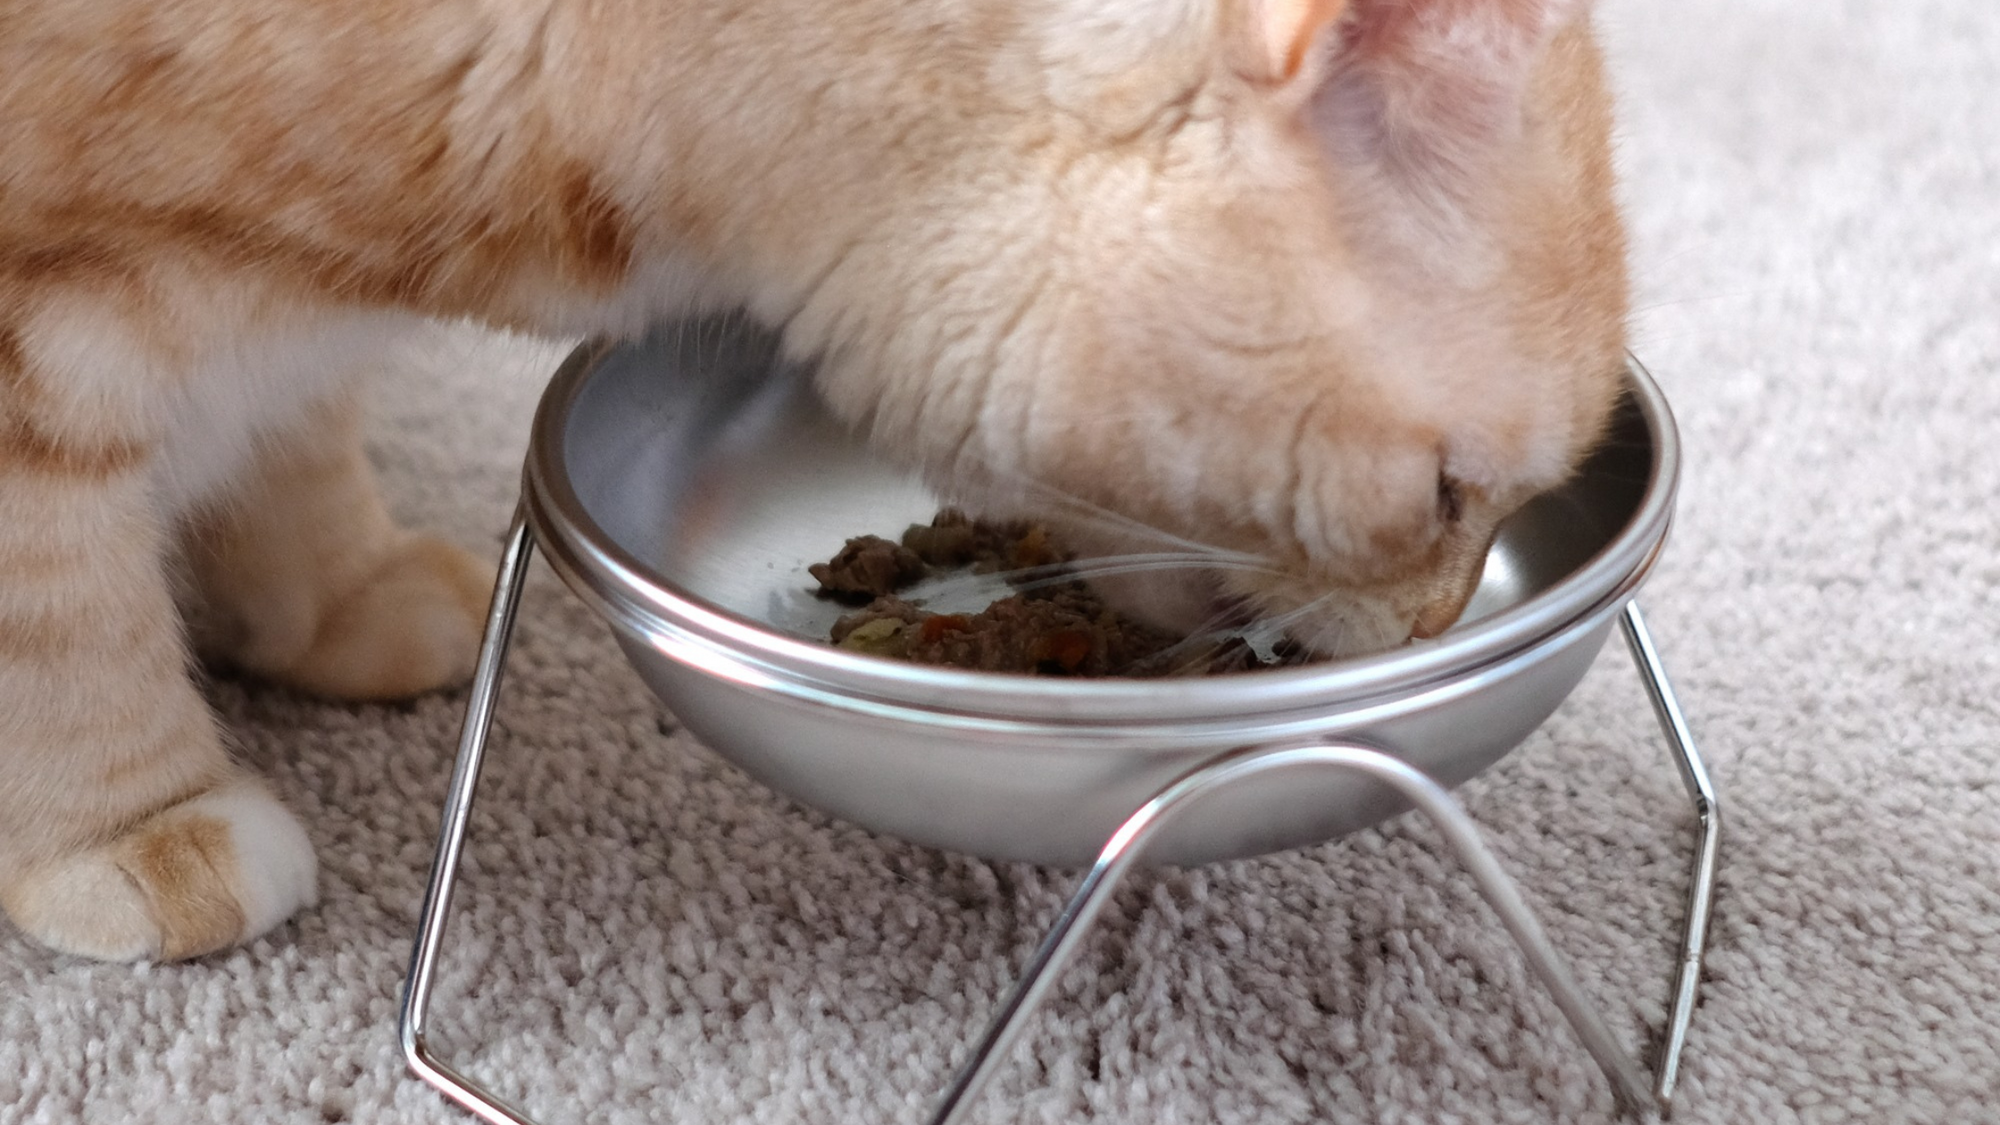 ginger cat eat kibble from a raised stainless steel cat bowl